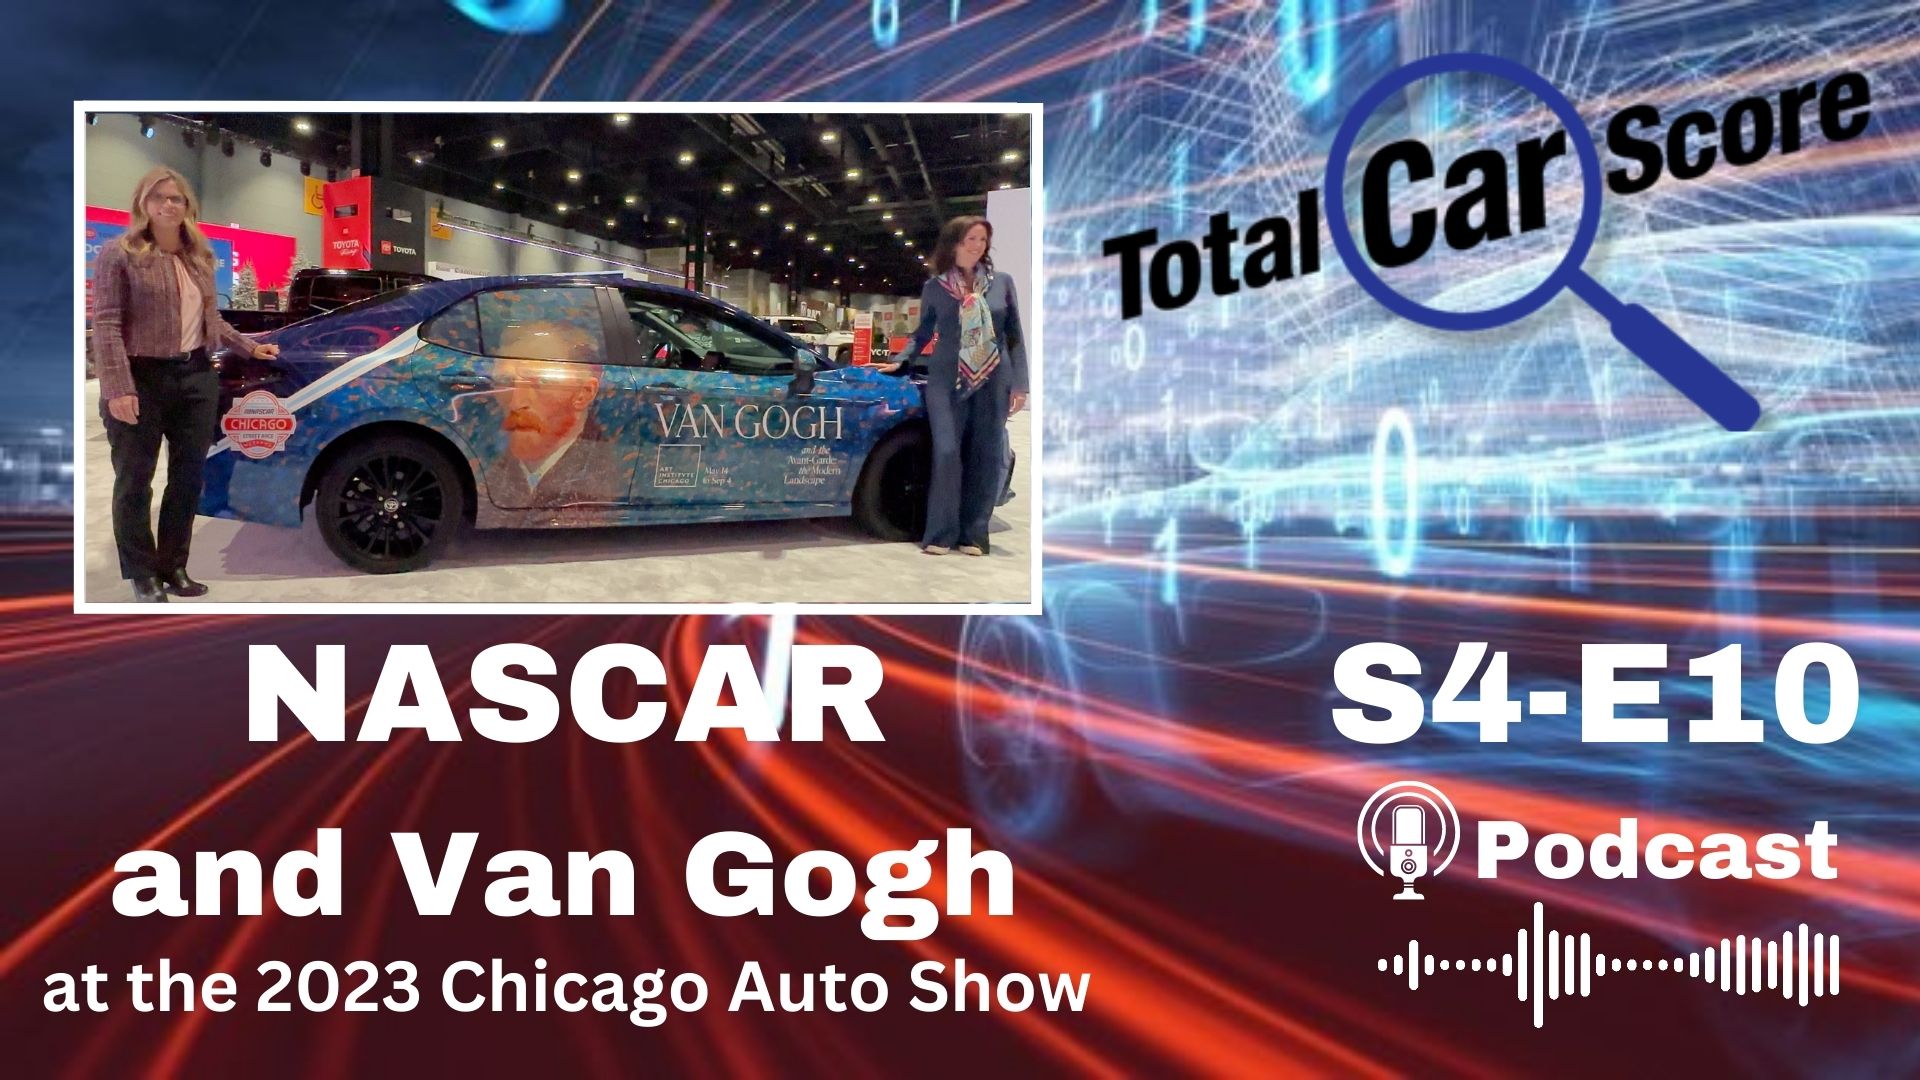 TCS S4-E10 - NASCAR and Van Gogh together at the first ever Chicago Street Race